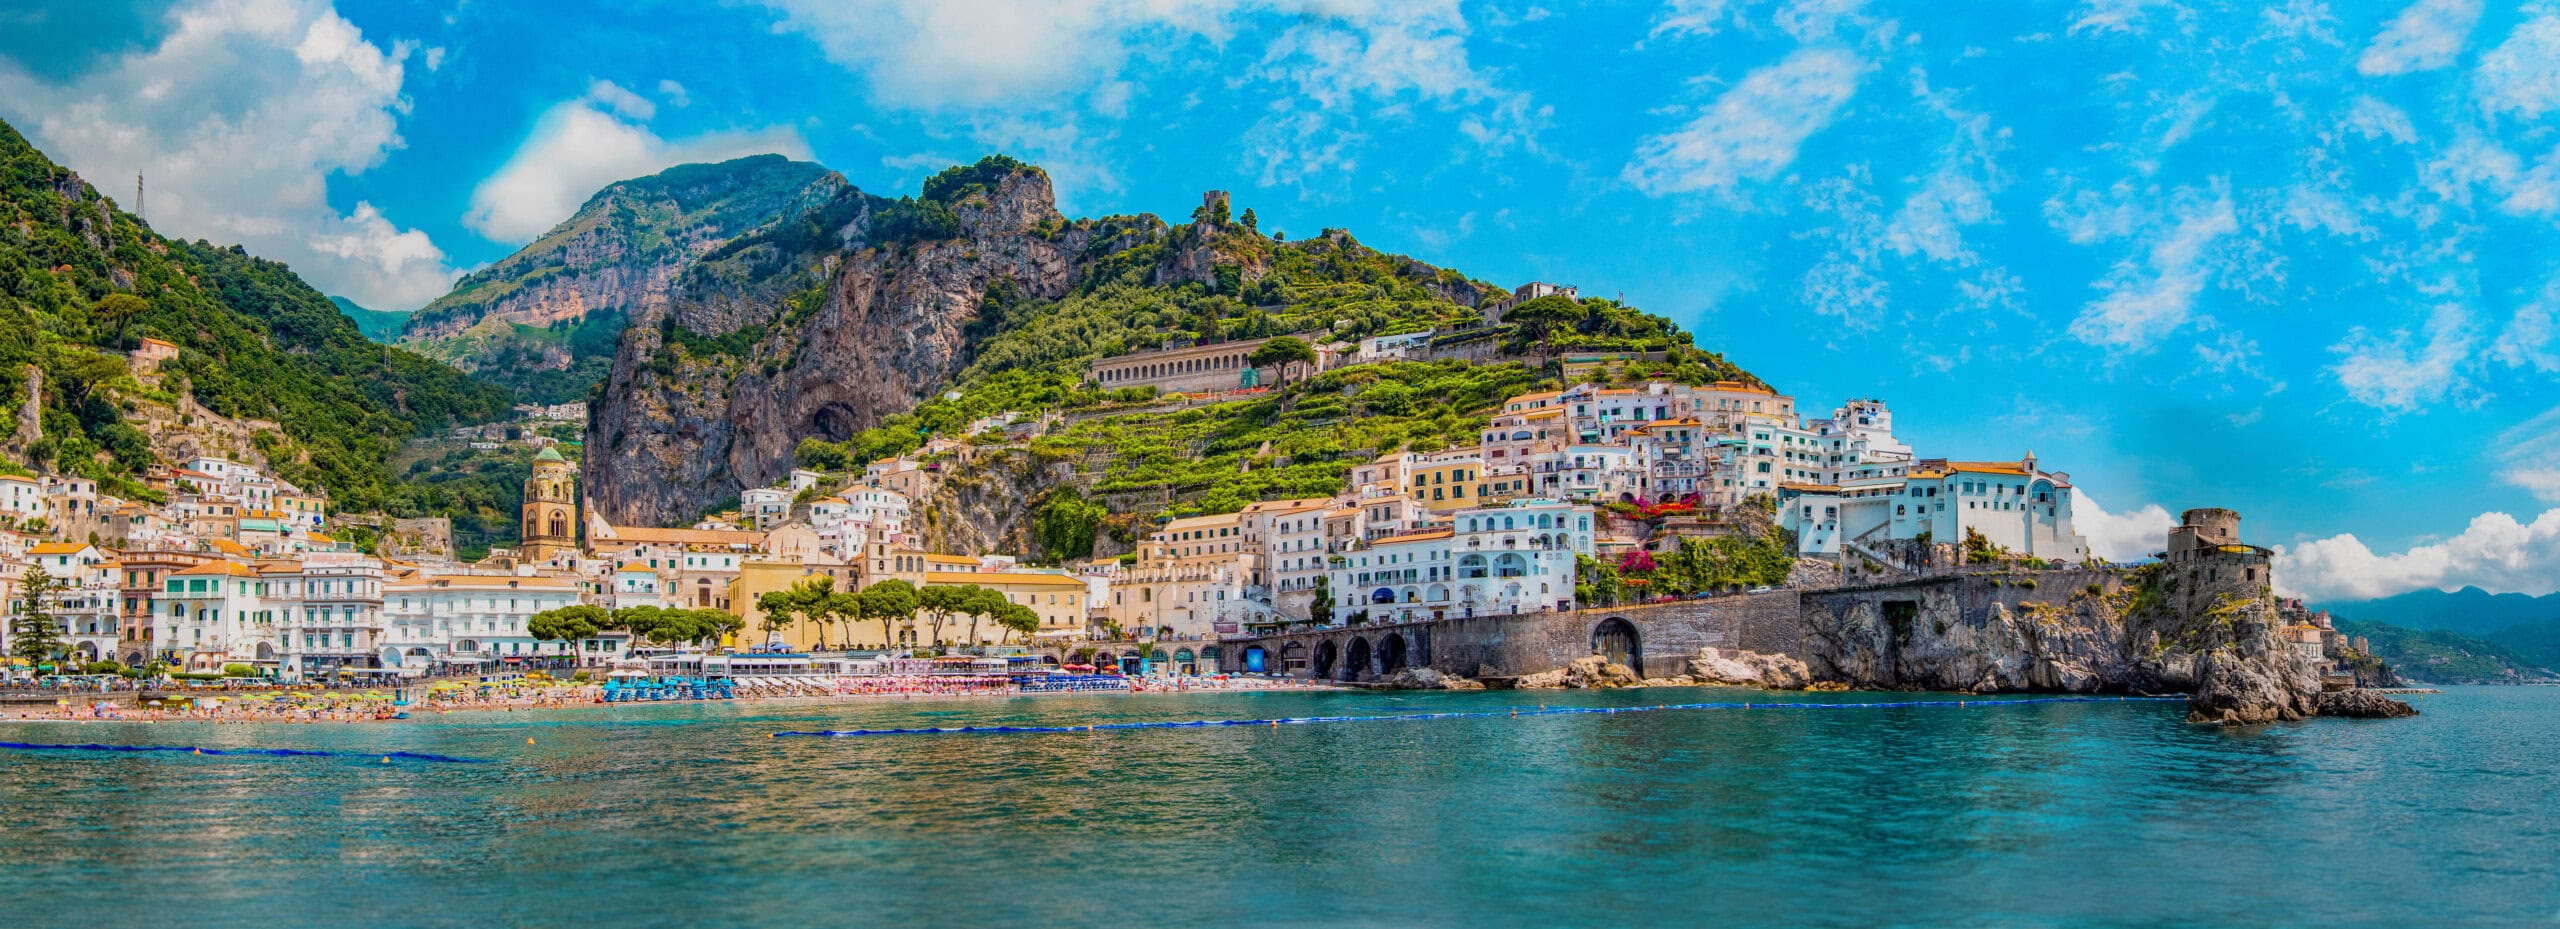 Capri Lifestyle  A place where adventure and natural beauty meet